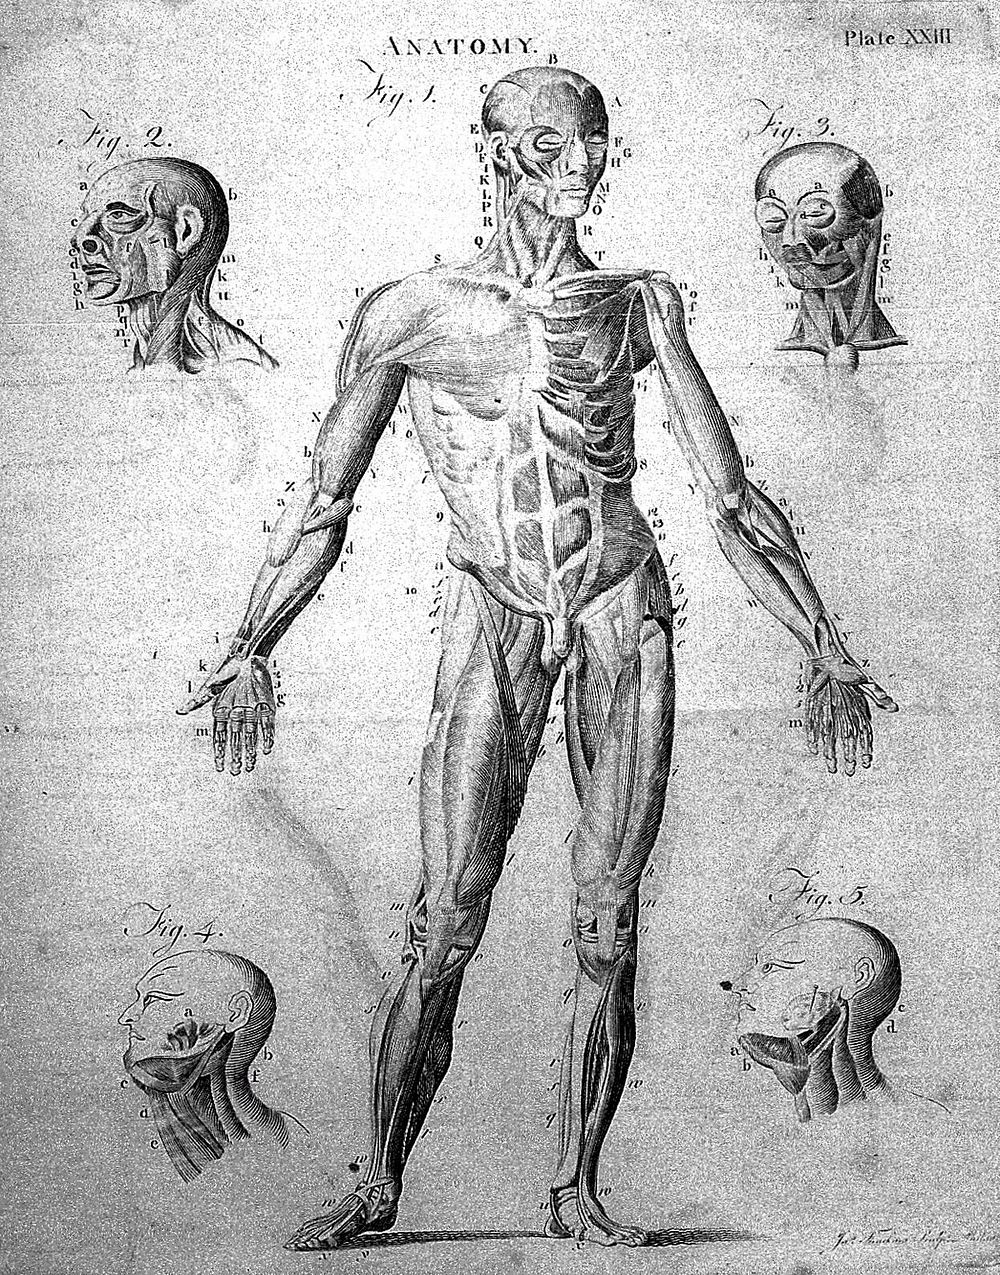 A compendious system of anatomy. In six parts. I. Osteology. II. Of the muscles, &c. III. Of the abdomen. IV. Of the thorax.…